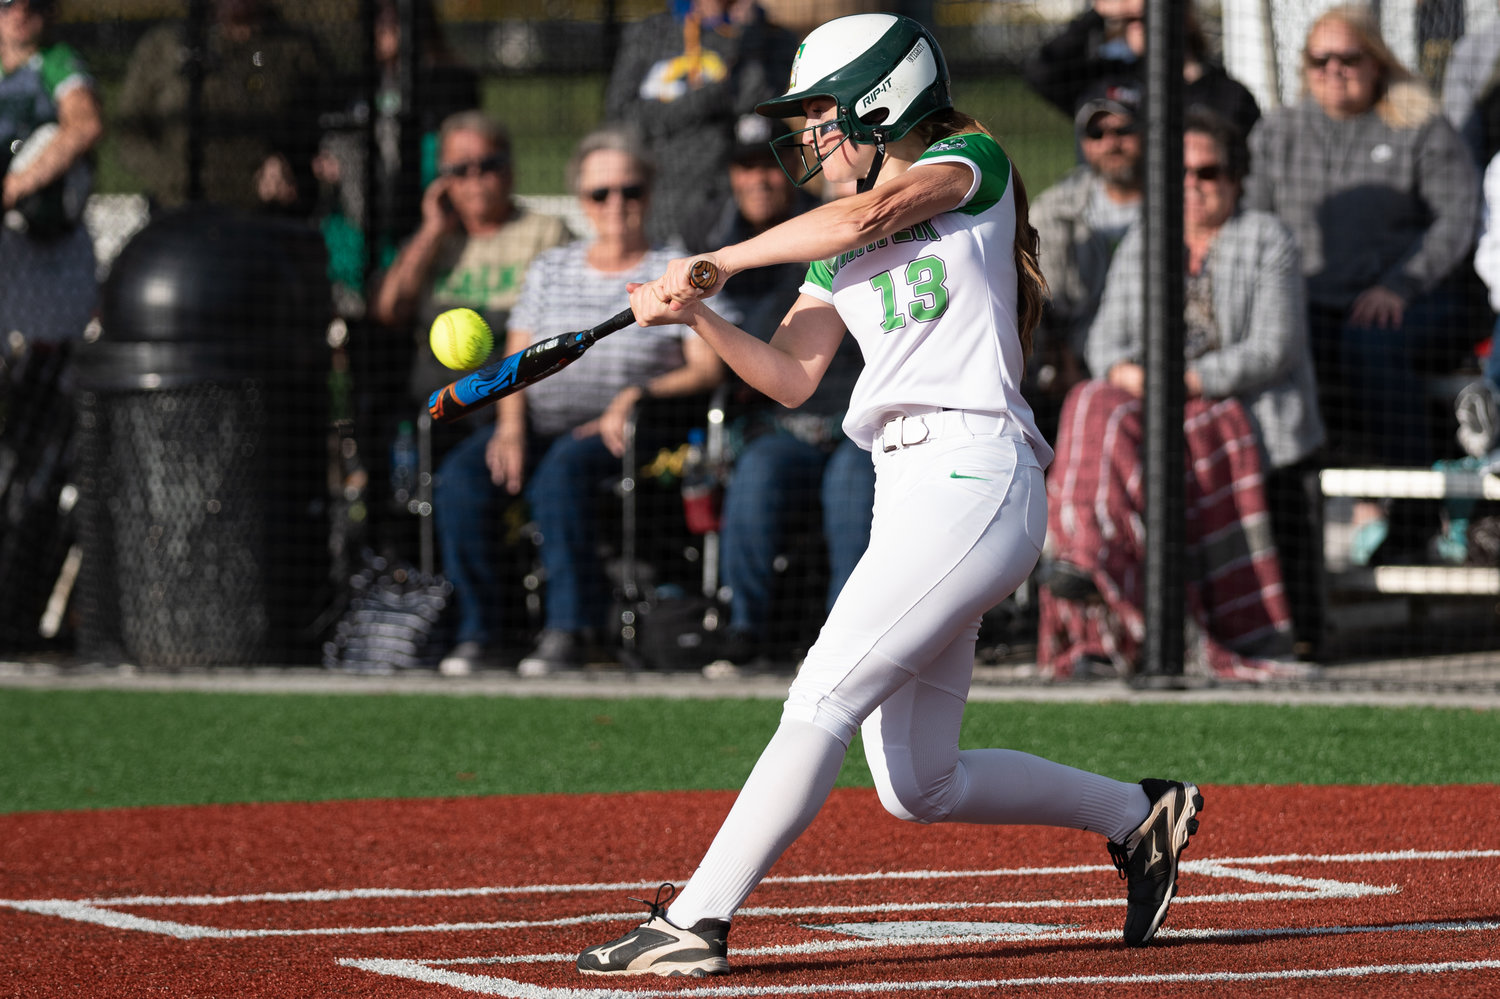 Tumwater's Aly Waltermeyer makes contact with a pitch against W.F. West in the 2A District 4 championship game at Rec Park May 20.